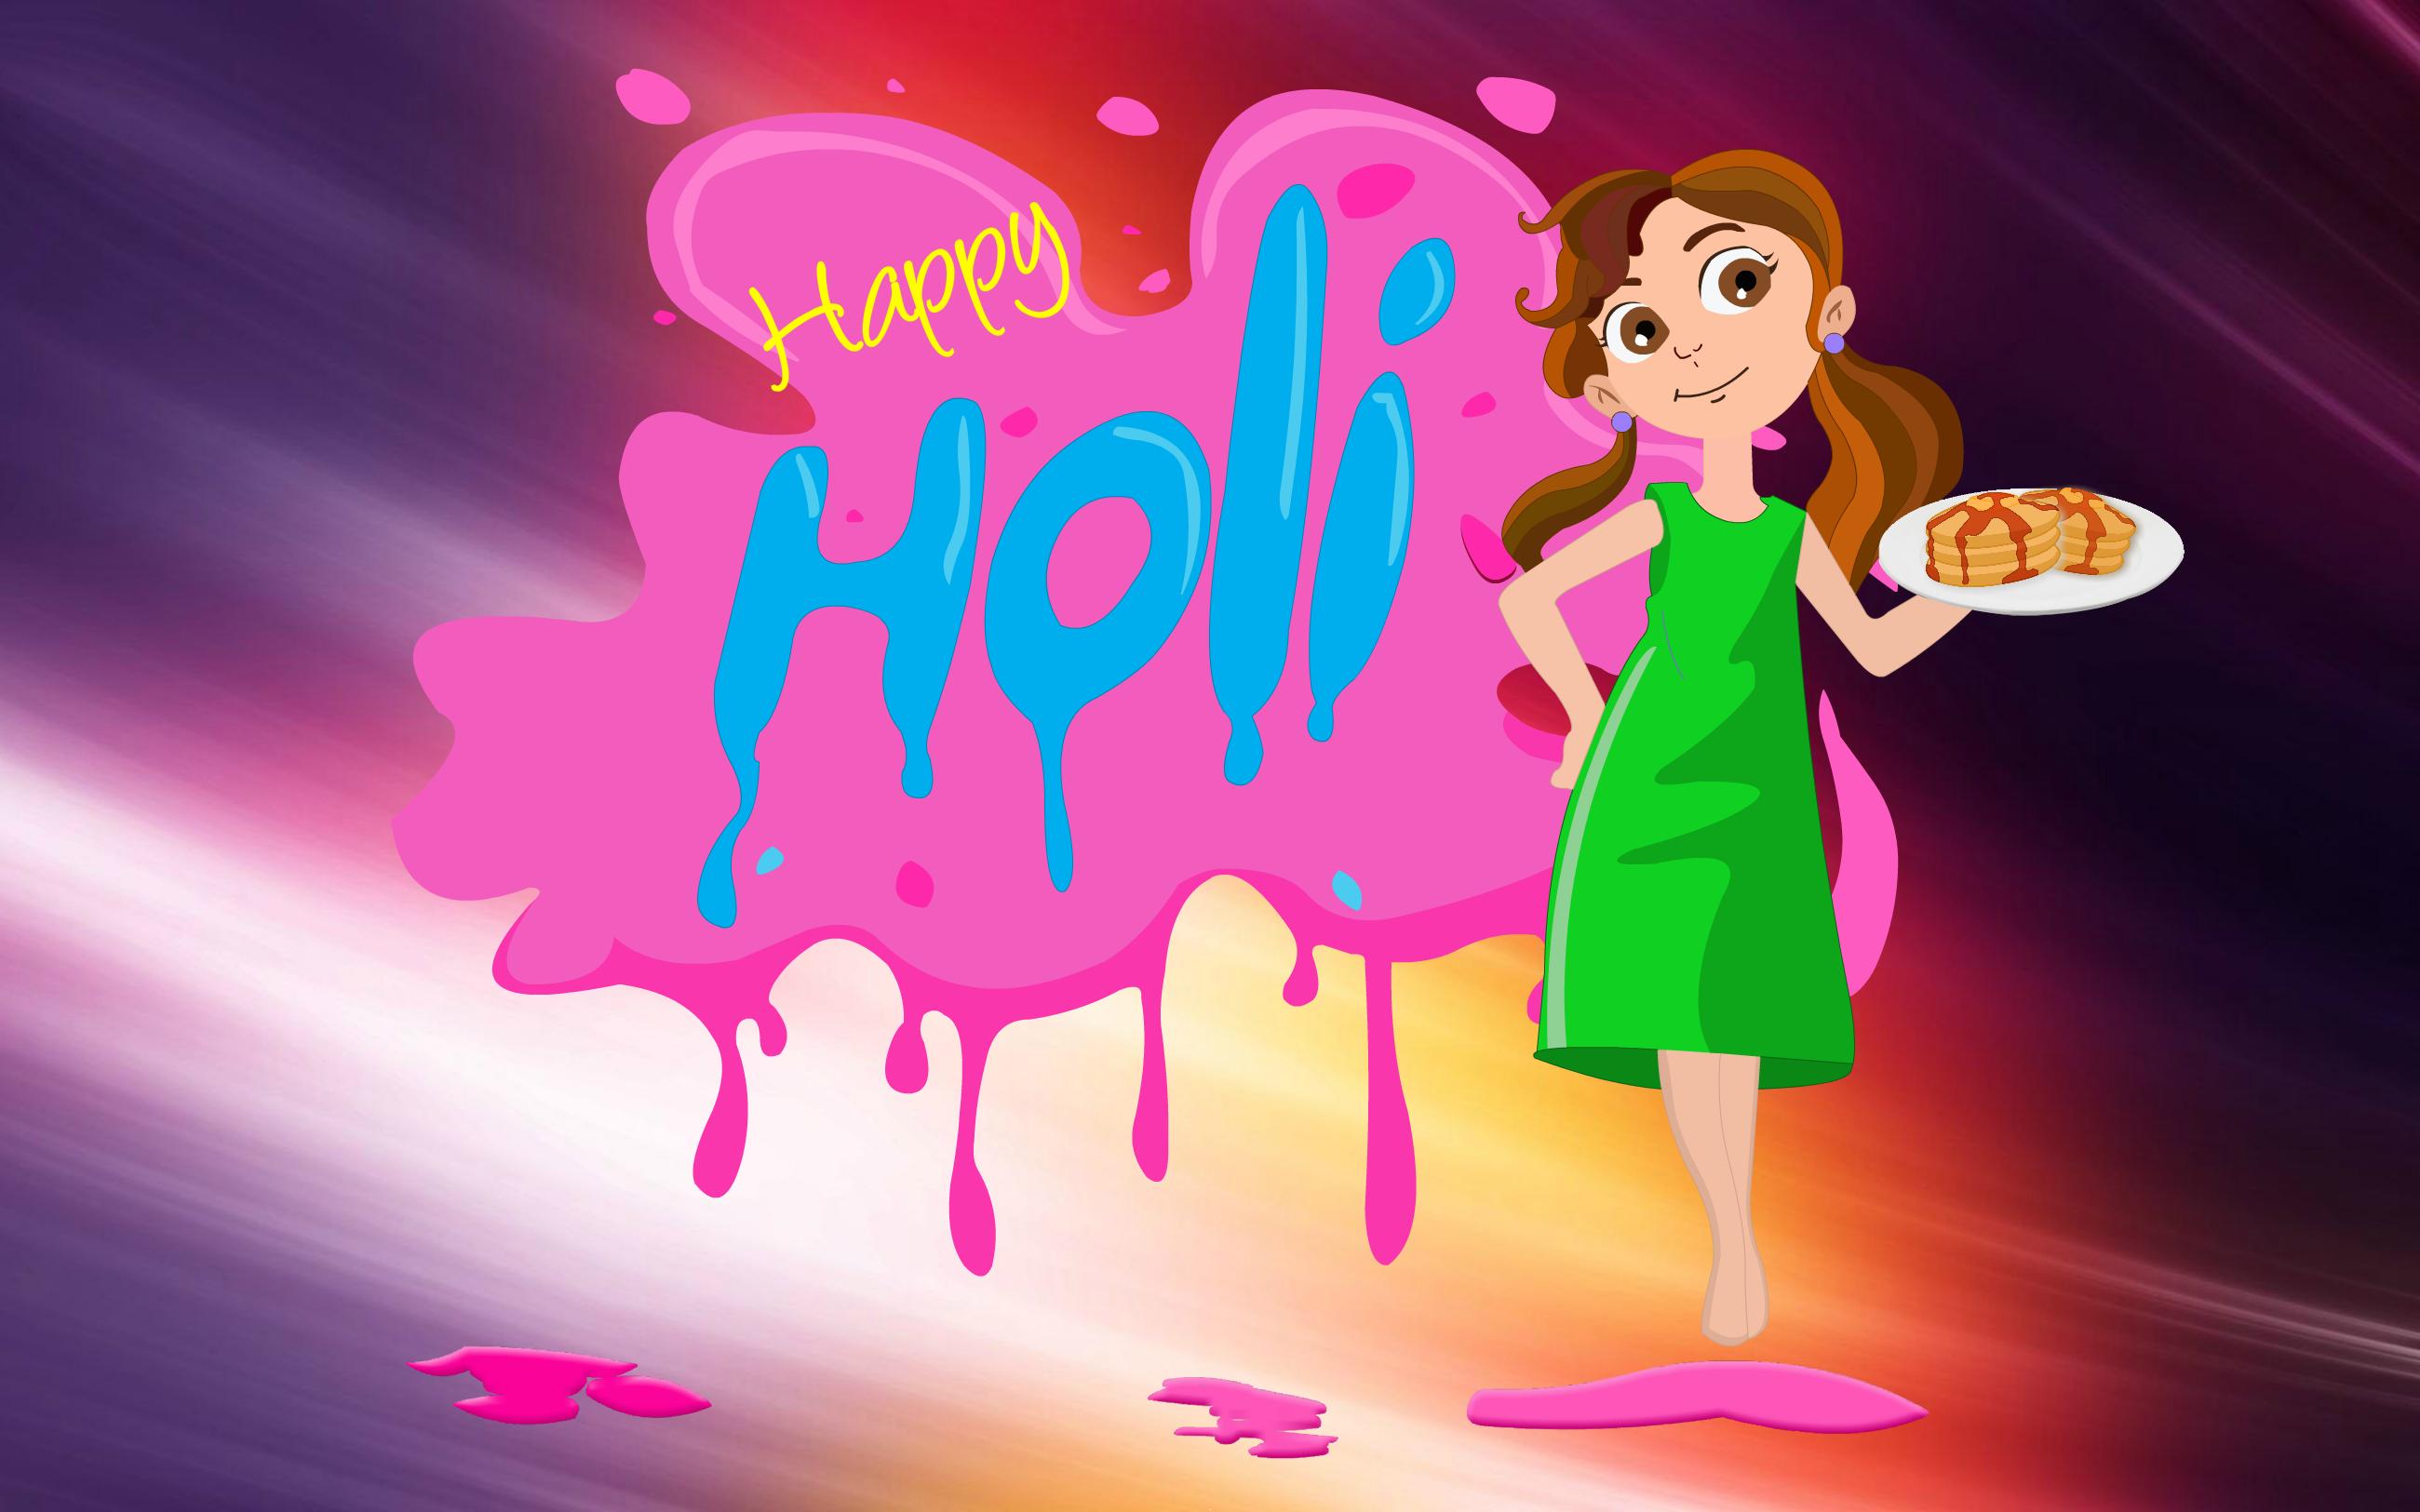 Download Cute holi hd wallpapers - Holi wallpapers and image for your  mobile cell phone